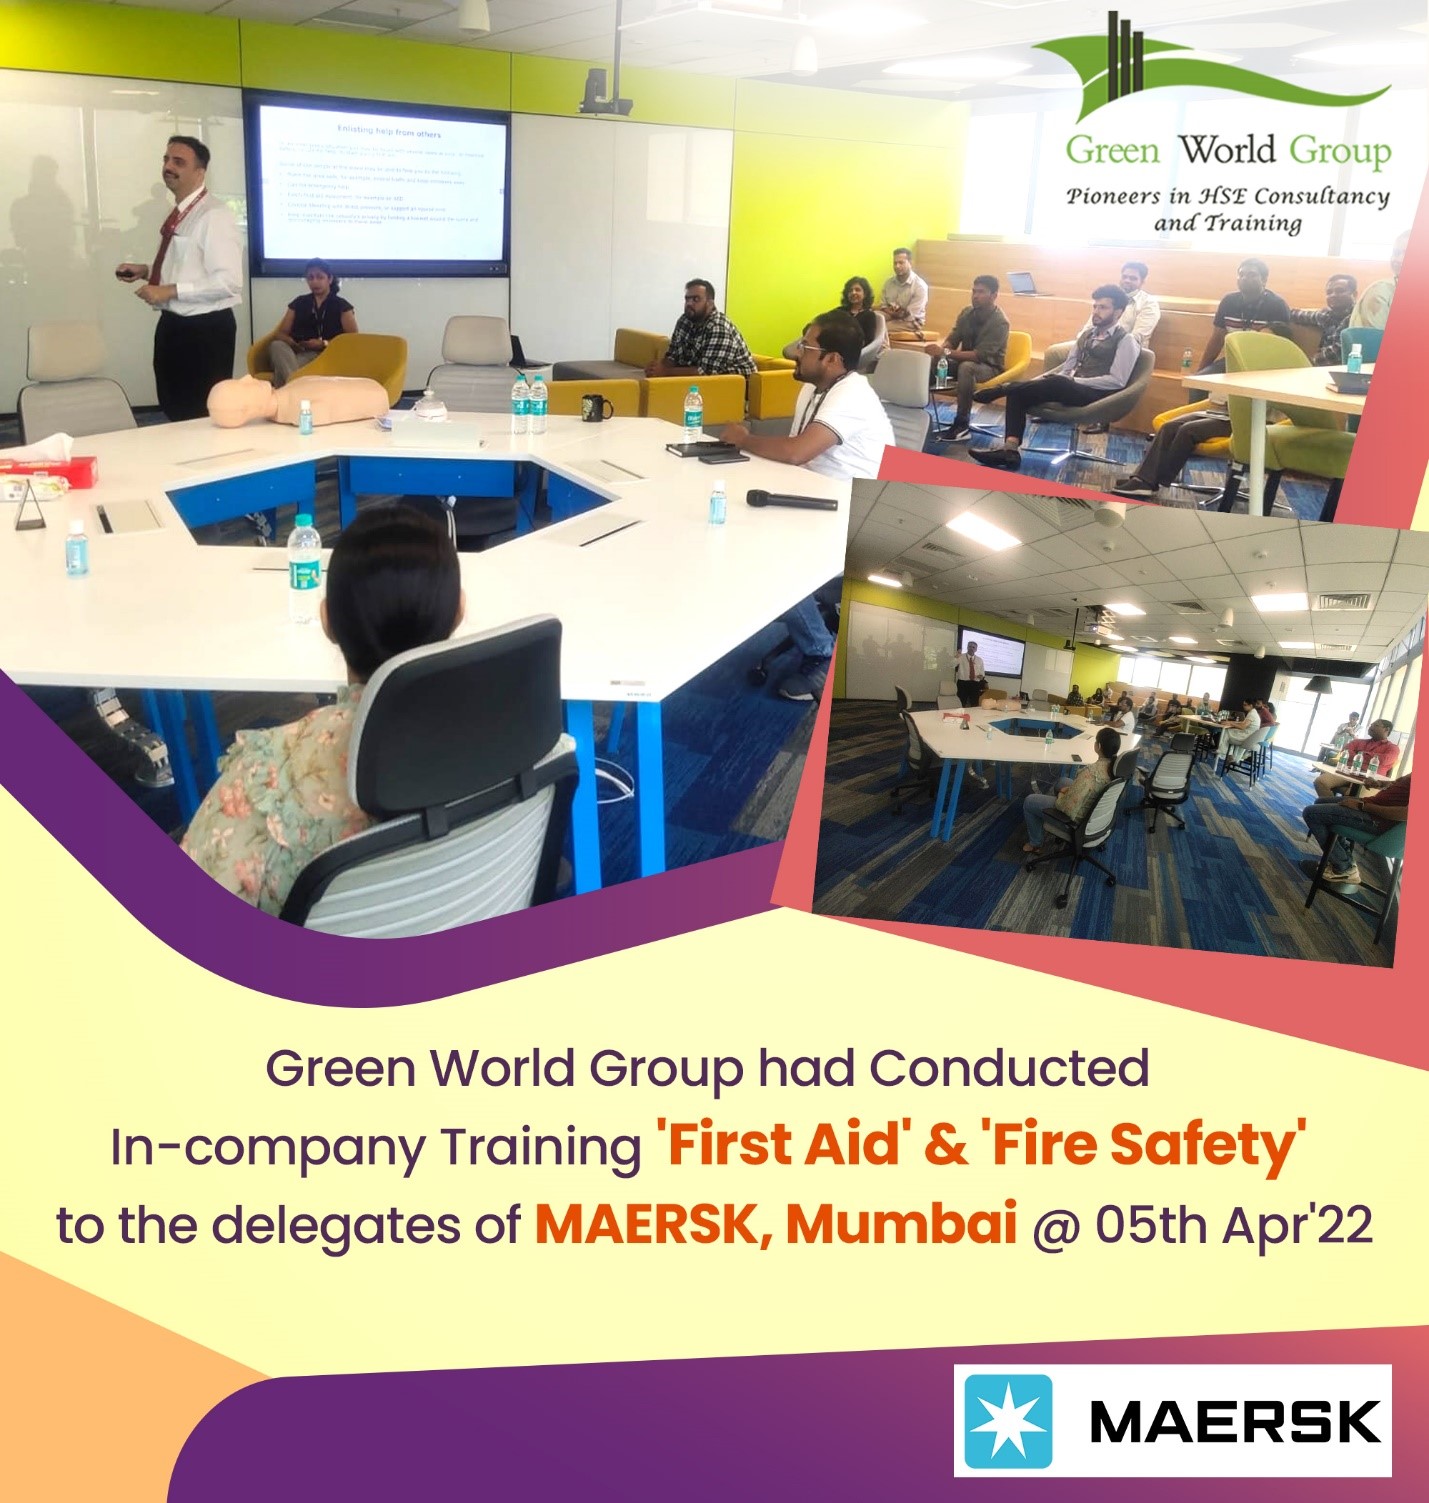 Green World successfully facilitates and delivers the batch on ‘First Aid’ & ‘Fire Safety’ to delegates of MAERSK, Mumbai @ 05th Apr 2022